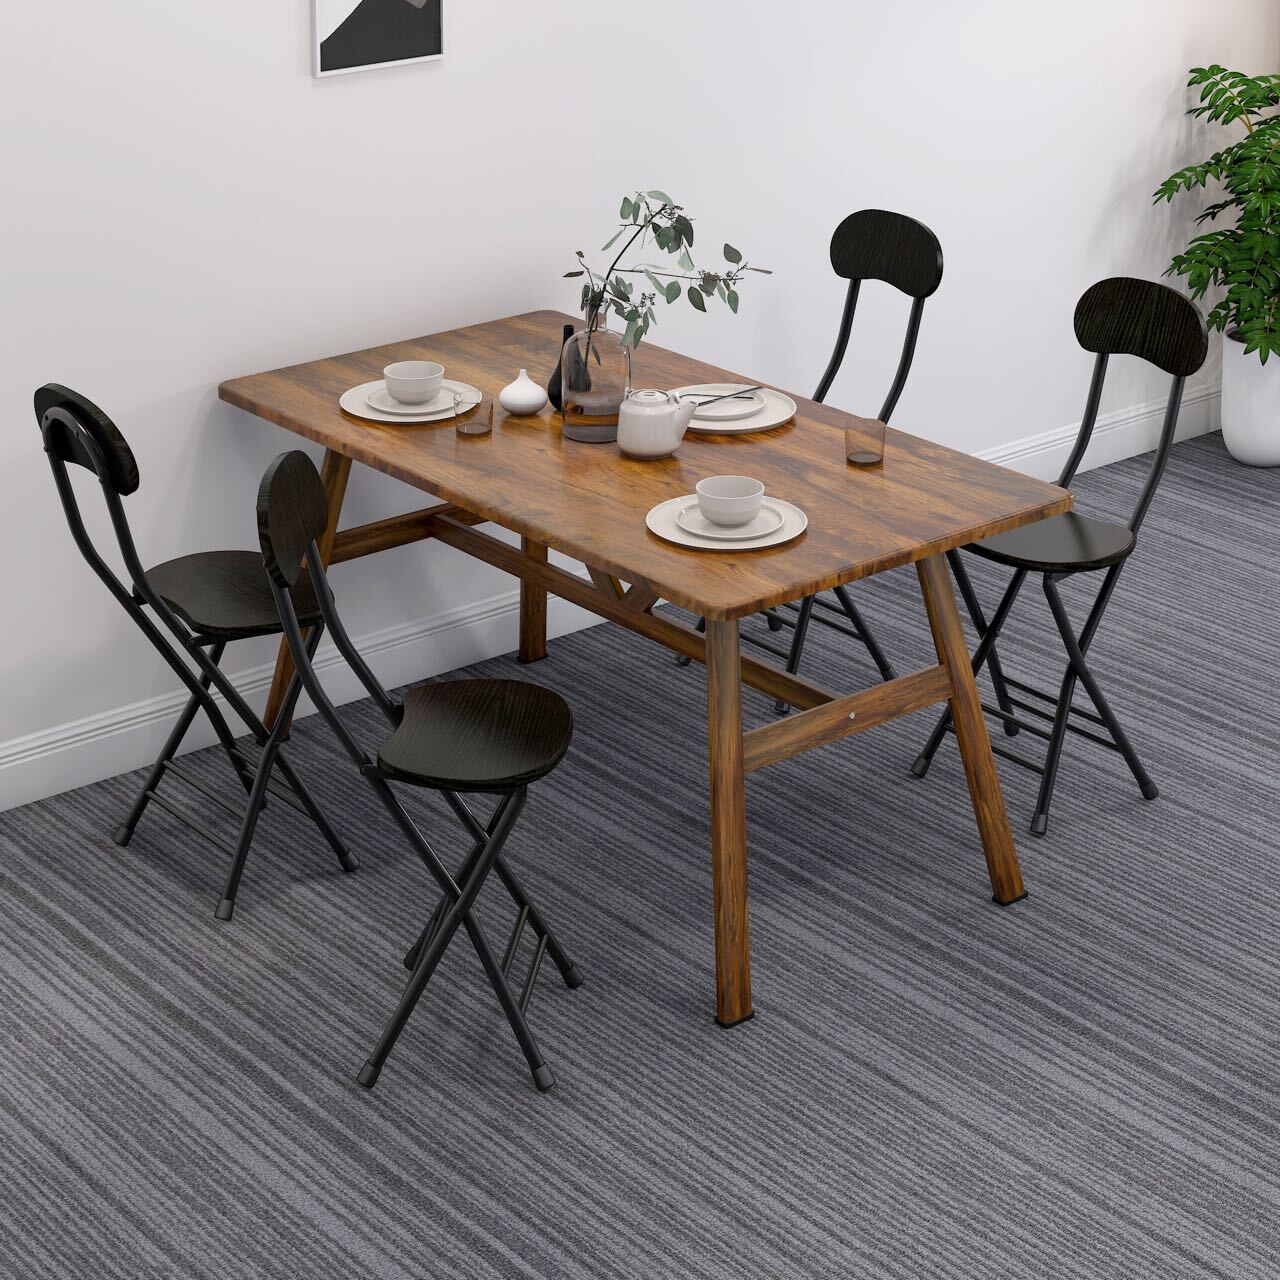 5-Piece Set Apollo Wood and Steel Dining Table & Folding Chairs (Walnut & Black)